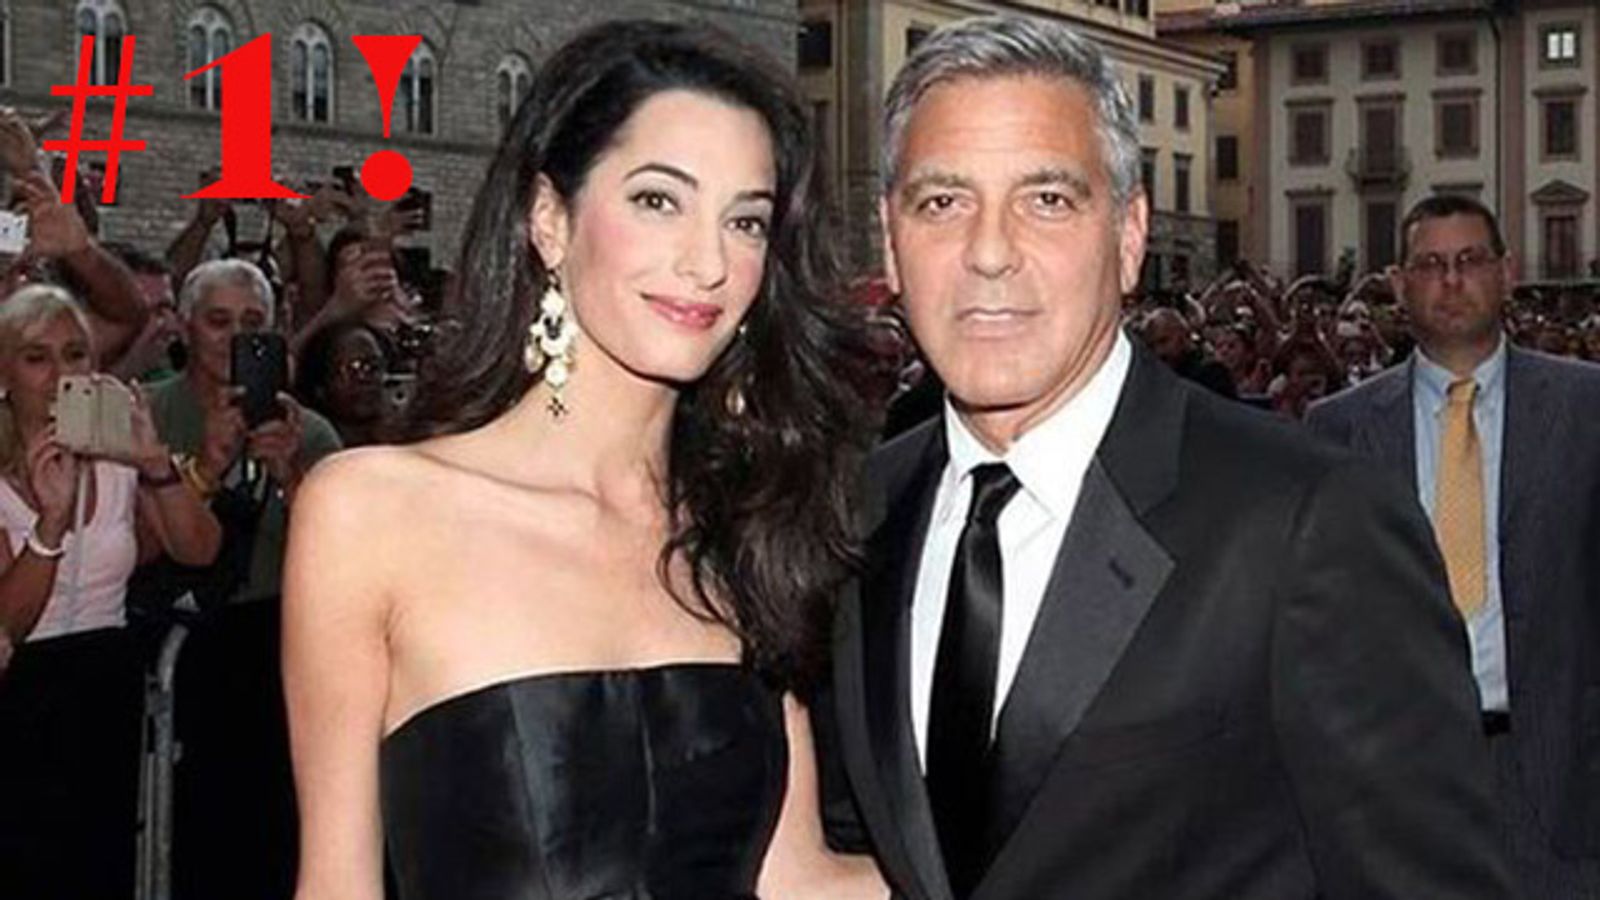 Clooney/Alamuddin Top Vivid's List of Most Wanted Sex Tapes